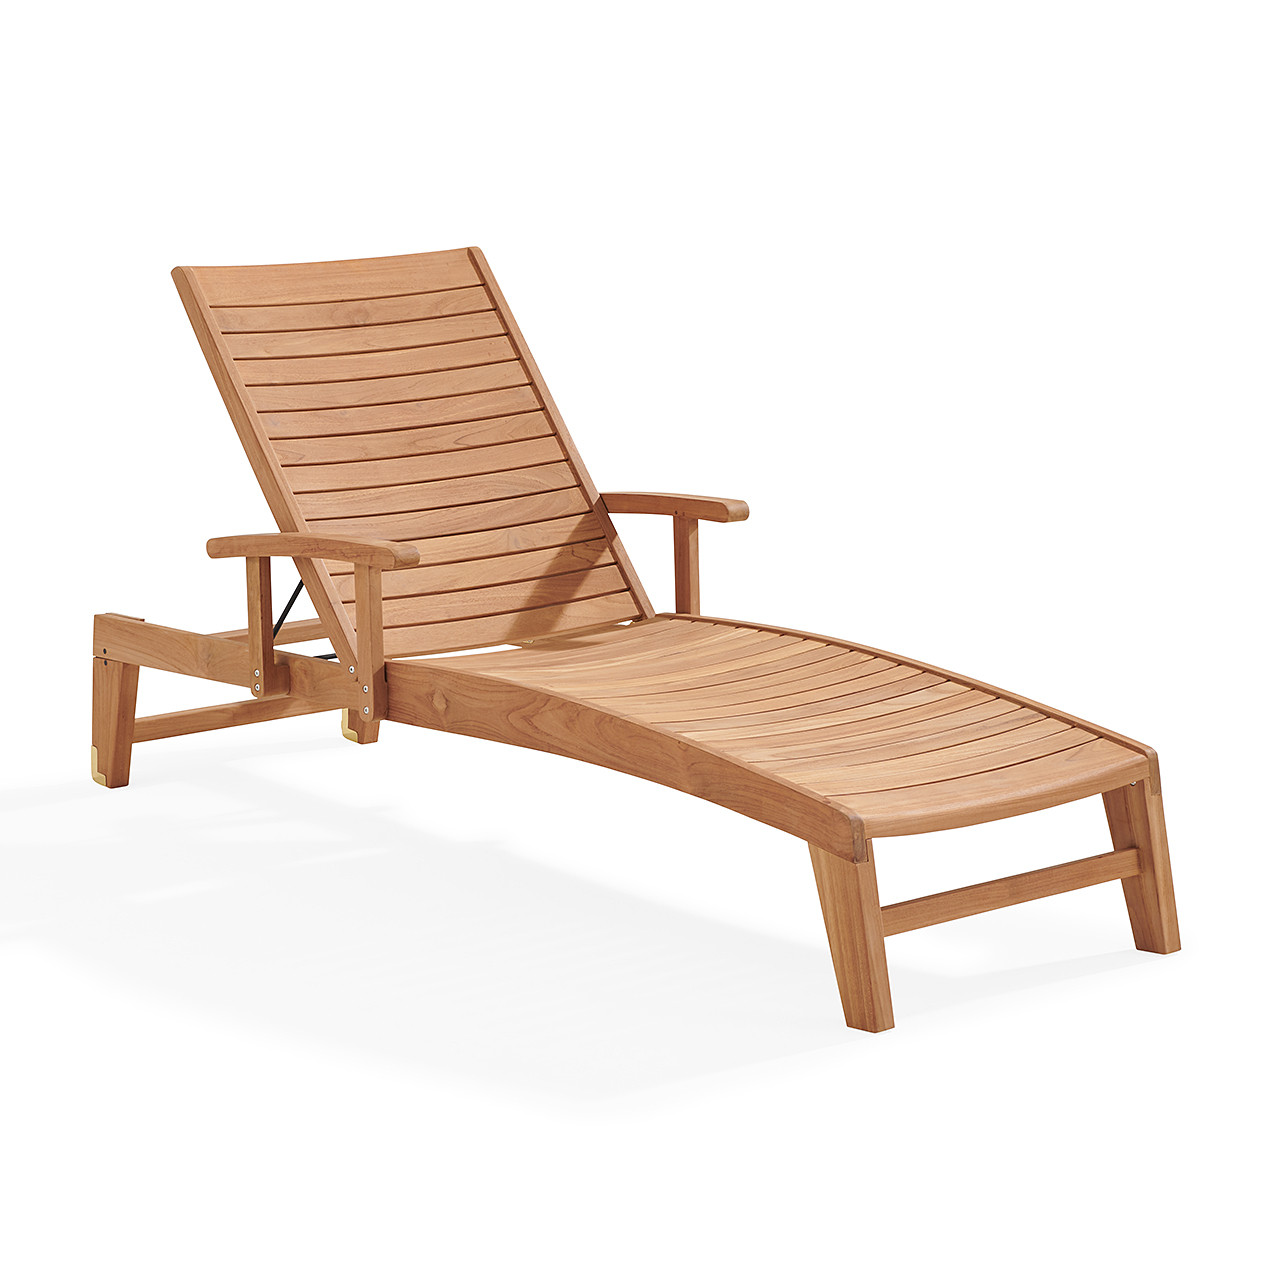 Pembroke Natural Stain Solid Teak With Cushion Chaise Lounge